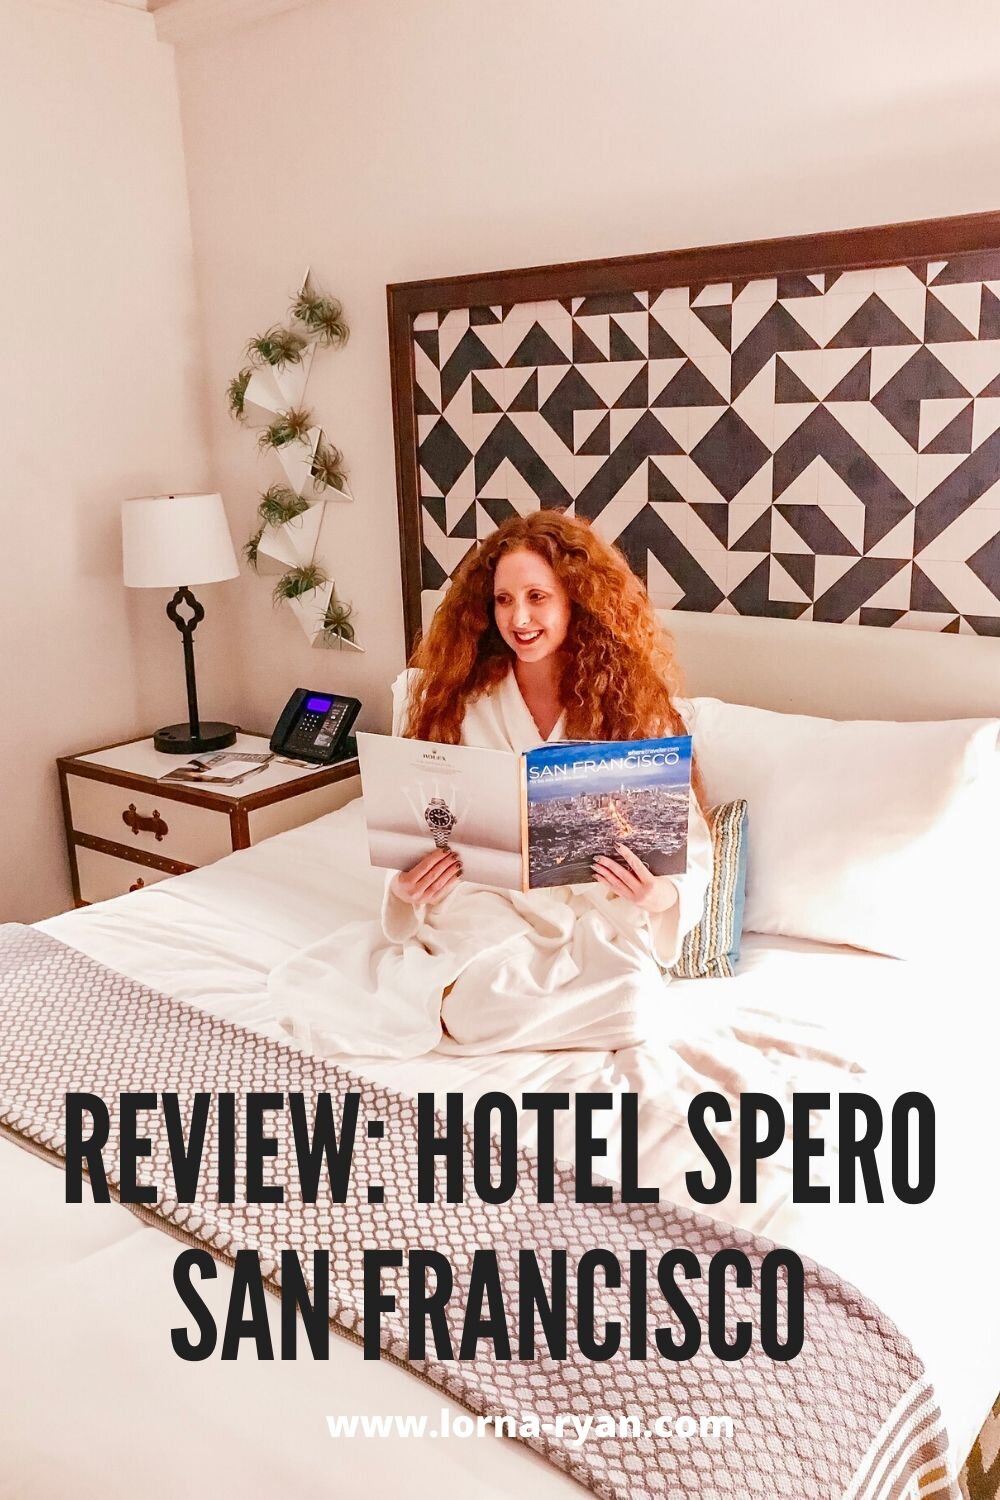 The Hotel Spero has a unique San Francisco style with a historical Spanish Colonial design that's perfectly situated near Union Square in San Francisco. An honest review recapping on my experience staying at Hotel Spero in Downtown San Francisco #sa…